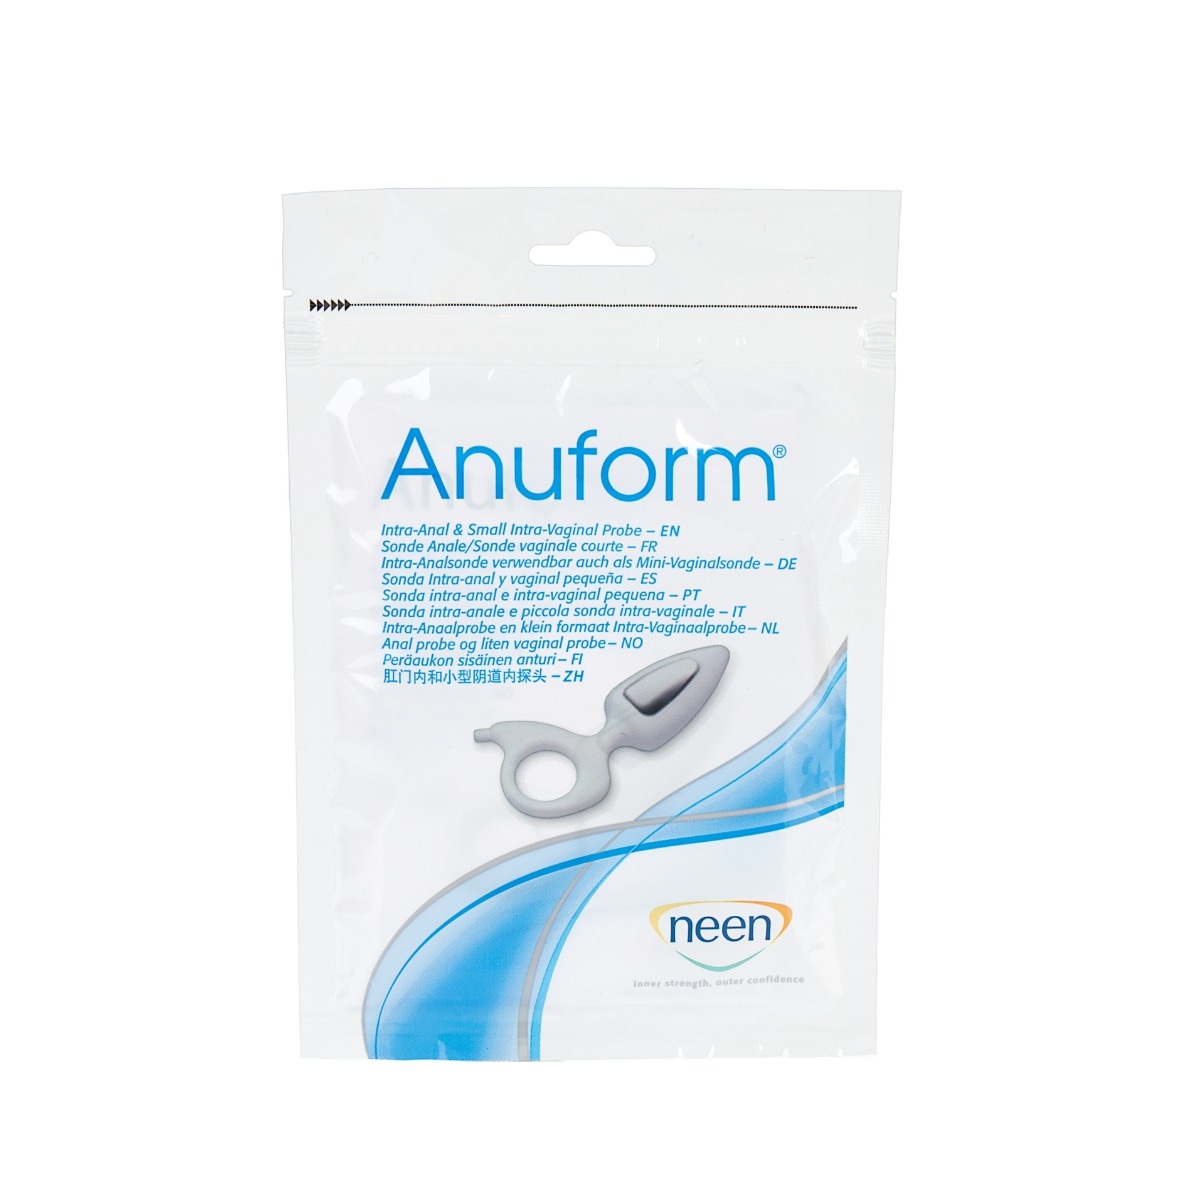 Anuform  Intra-Anal and Small Intra-Vaginal Probe - Product Package